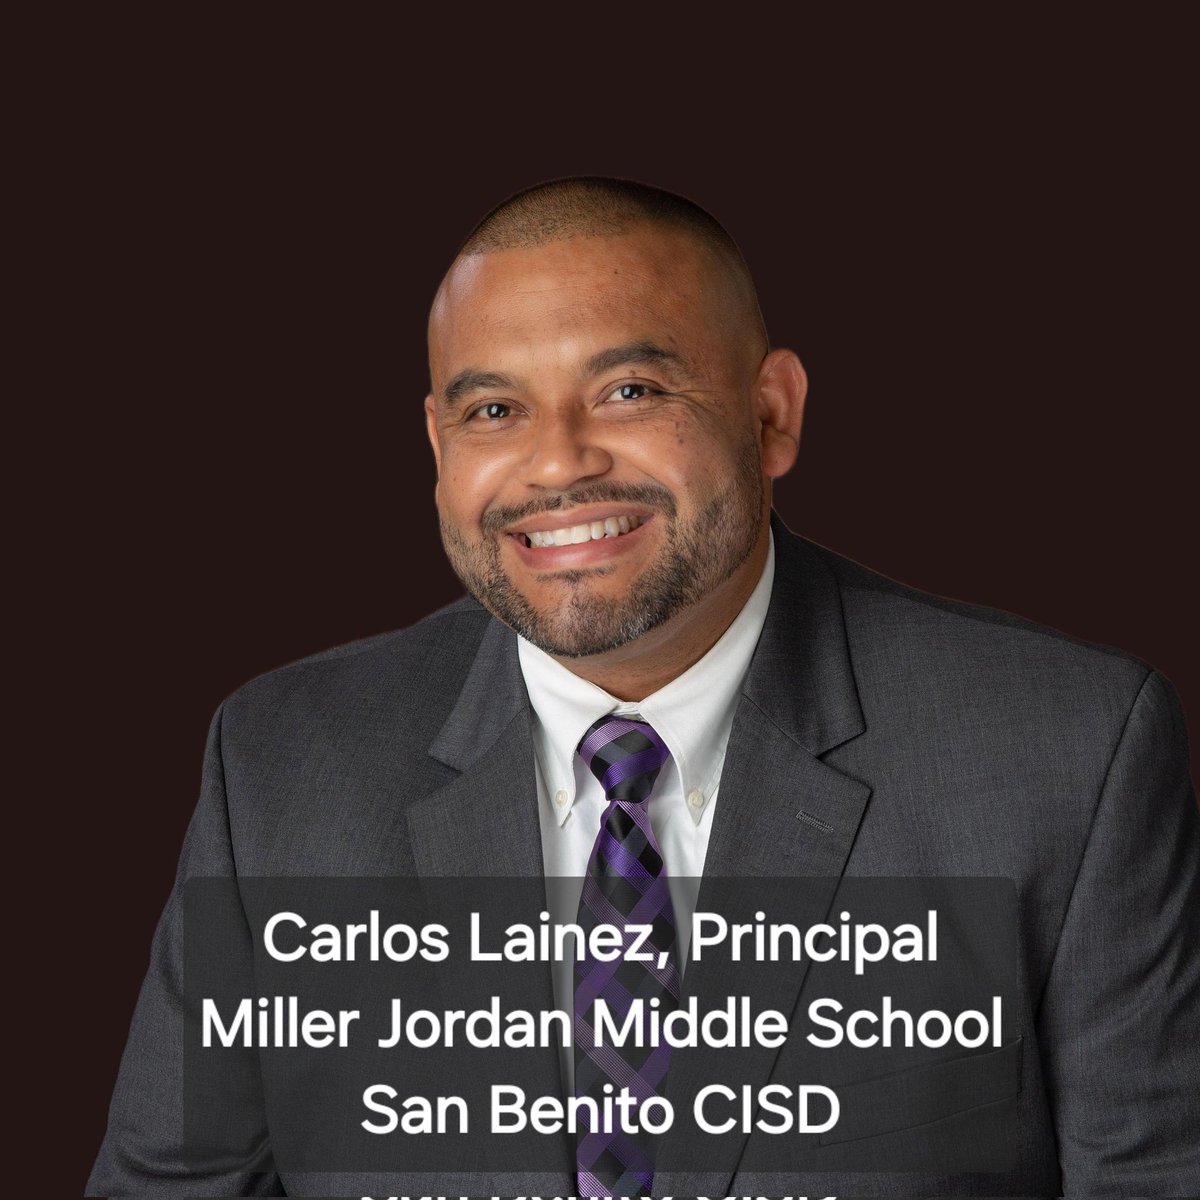 Congrats to Carlos Lainez on his appointment as Principal at Miller Jordan Middle School. This is indeed a well-deserved recognition of his dedication and commitment to the field of education. #FlexFriday #SendIt